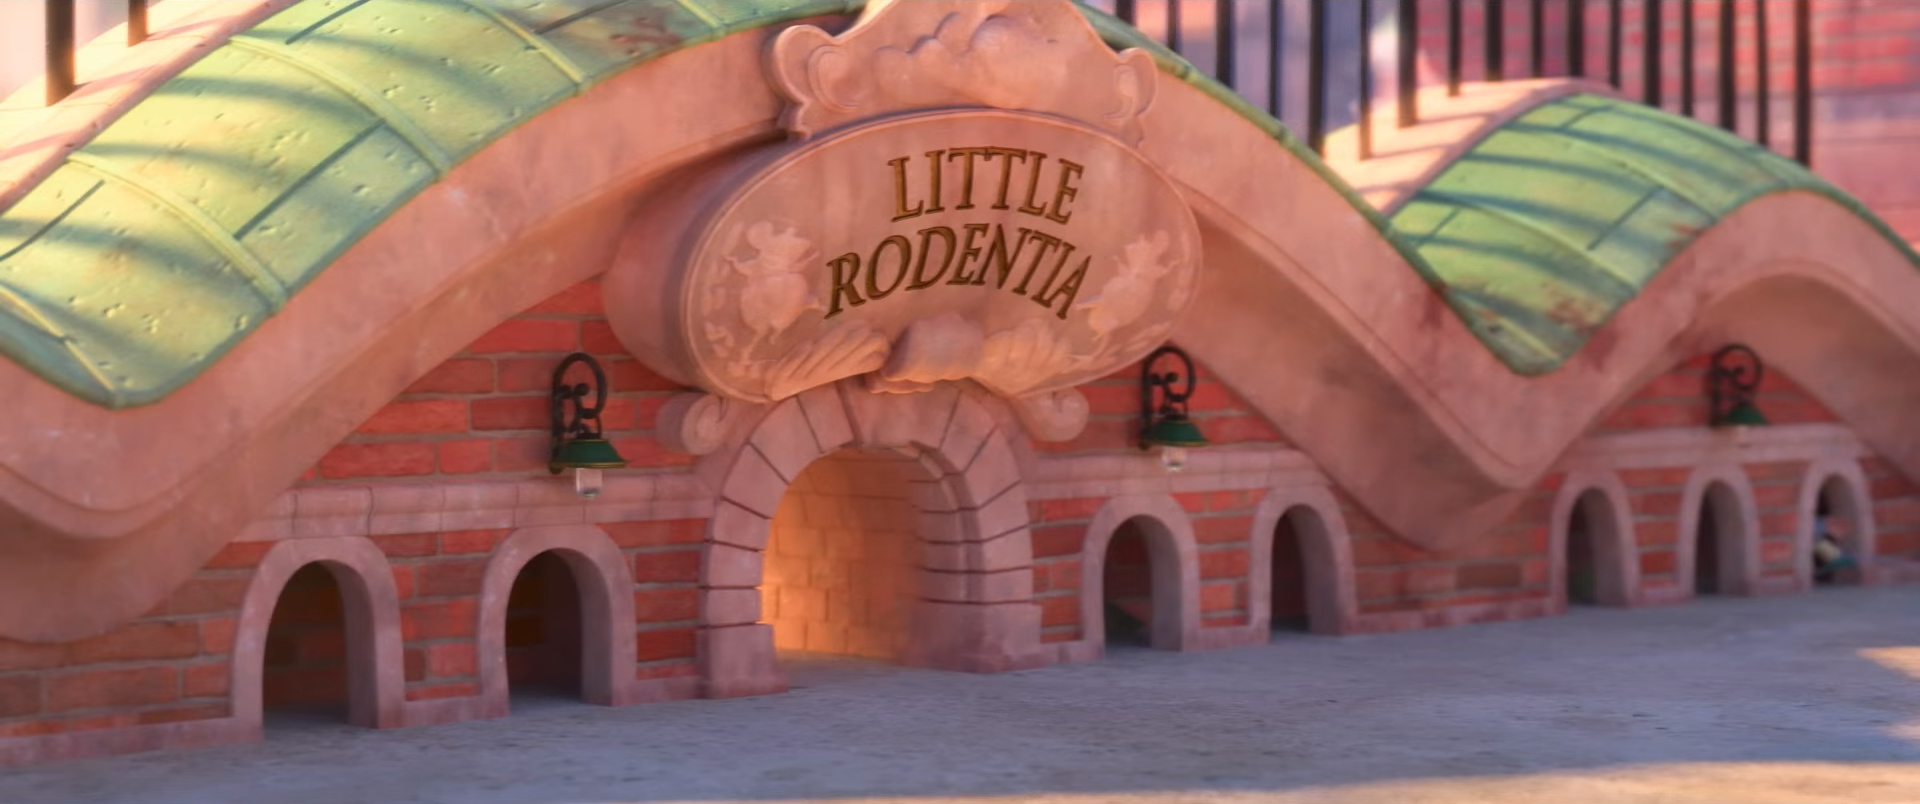 Litle Rodentia